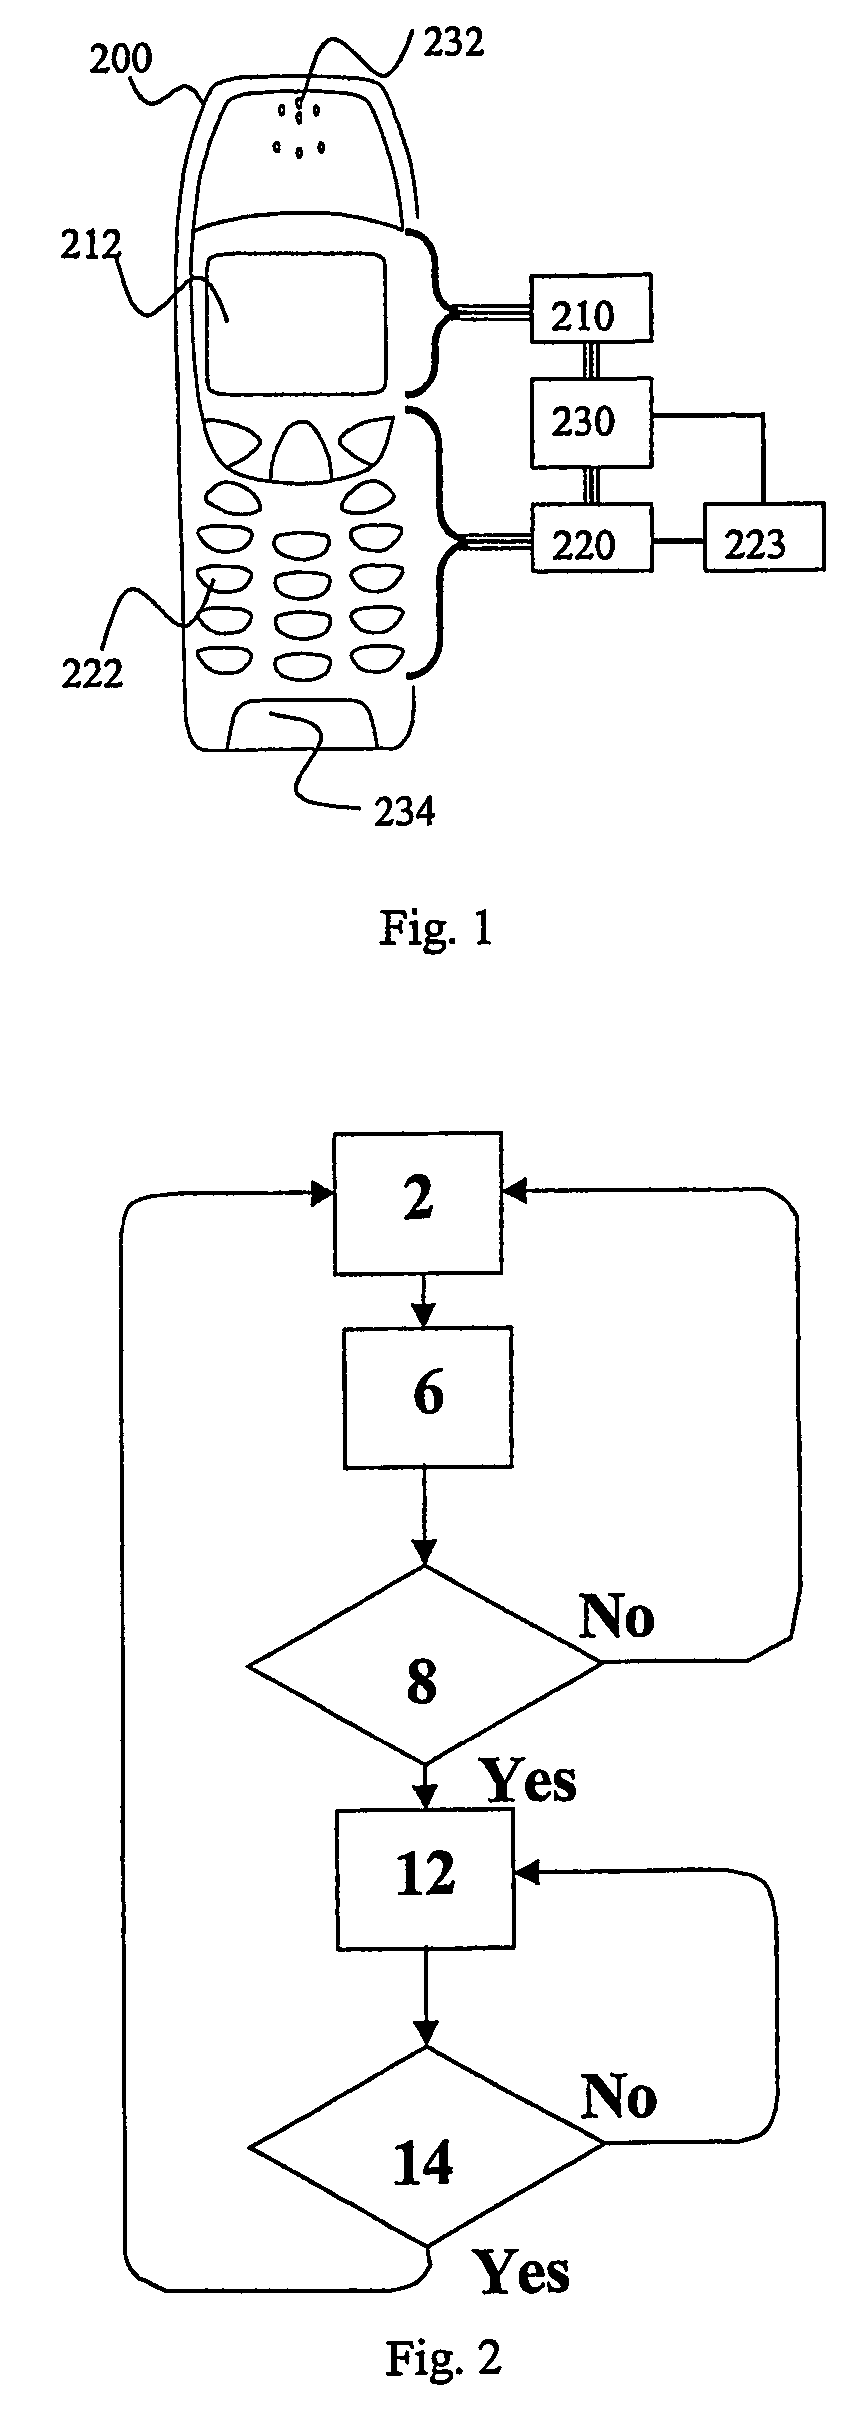 Method for intermediate unlocking of a keypad on a mobile electronic device